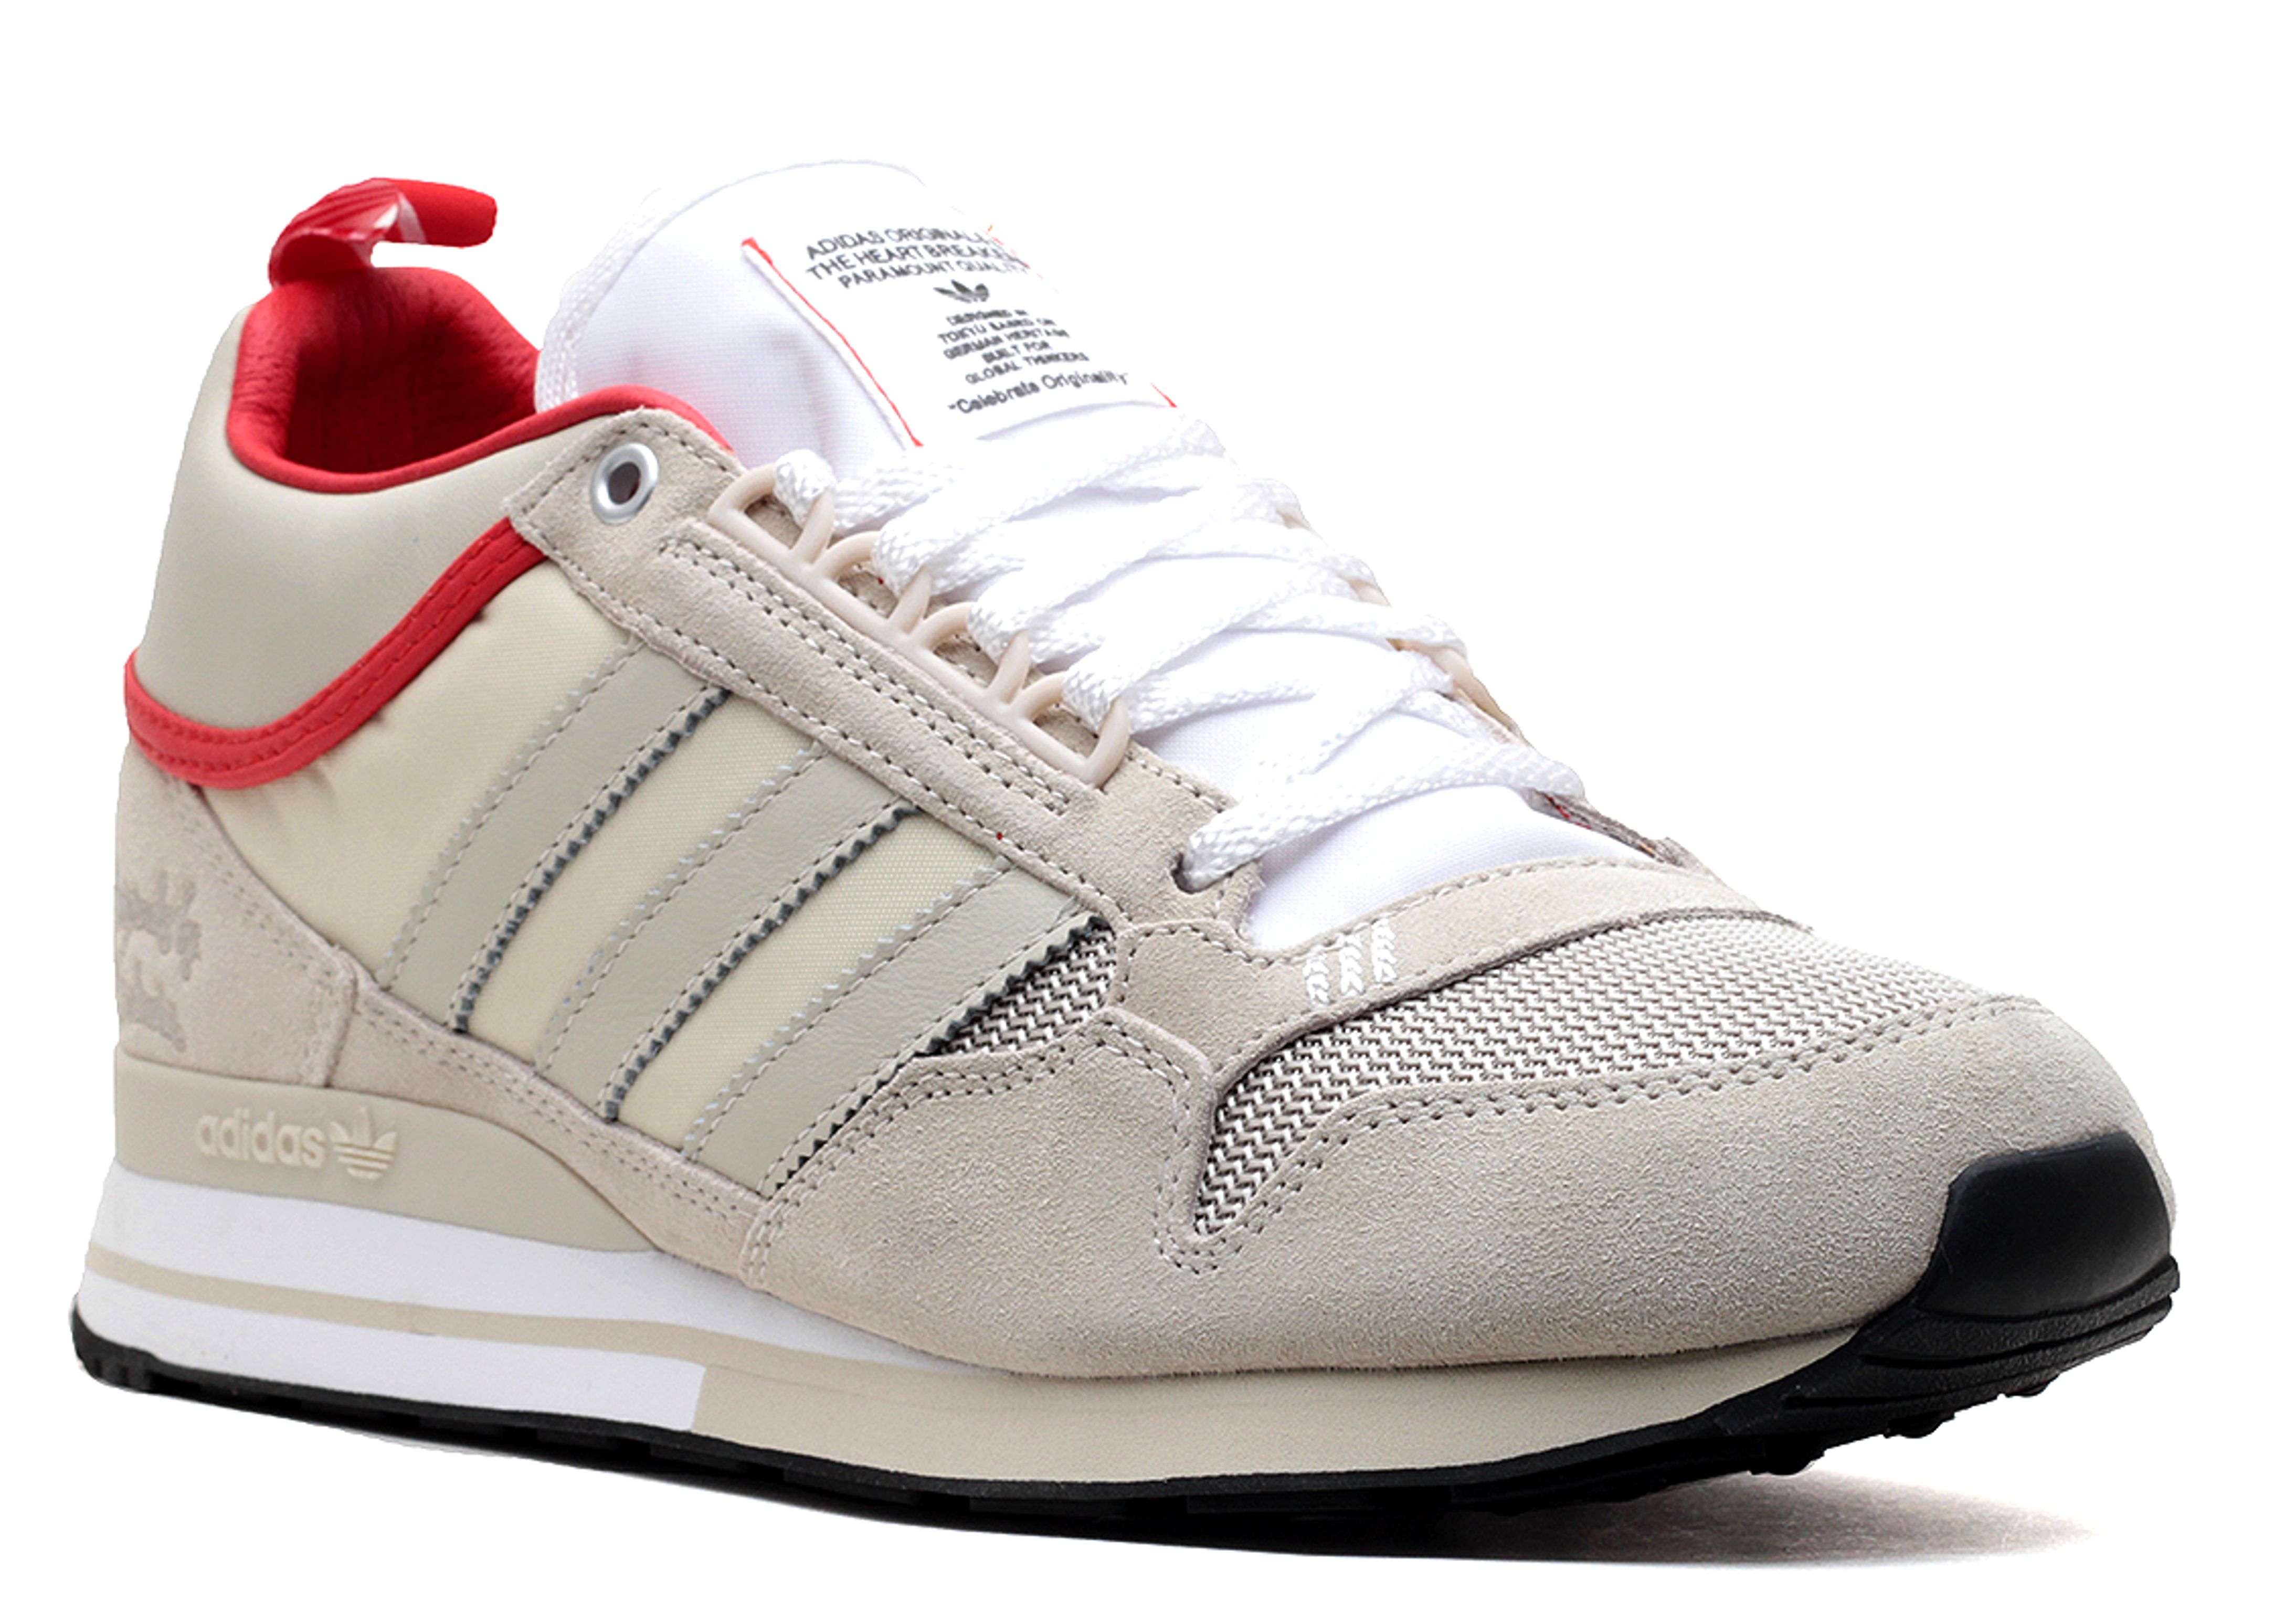 Bw Zx 500 Mid 'Bedwin And The Heartbreakers' - Adidas - D65658 